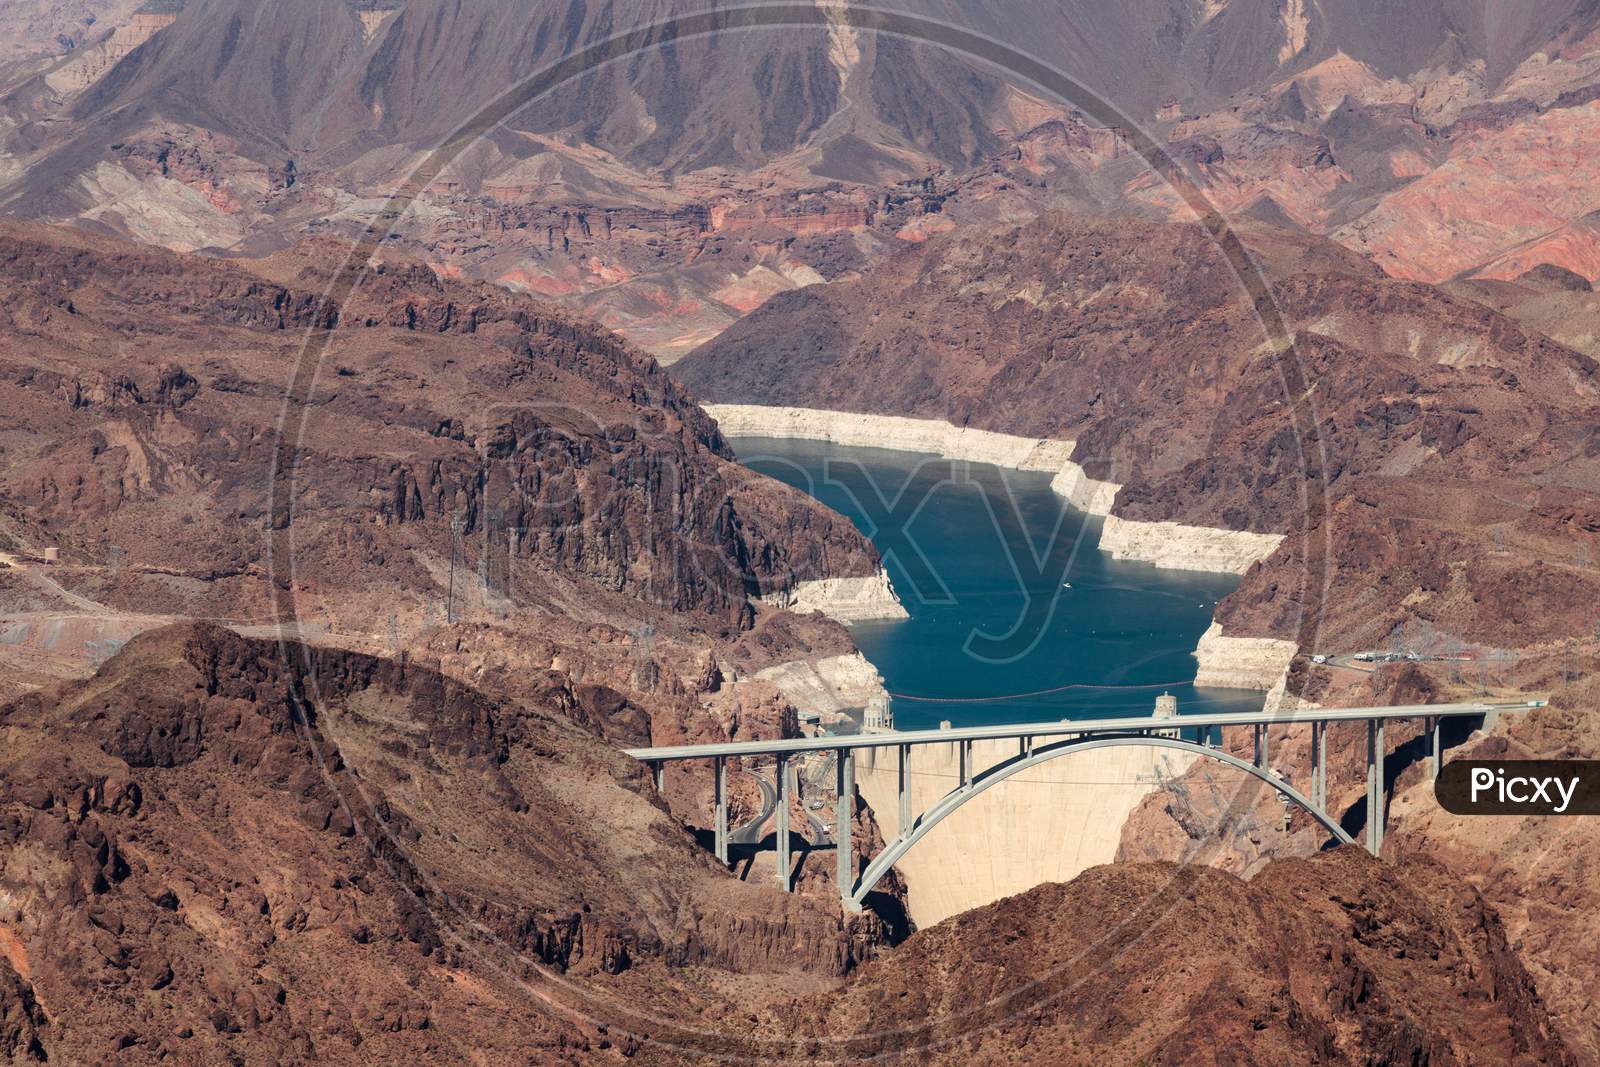 View Of The Hoover Dam And Bridge On The Boder Of Arizona/Nevada